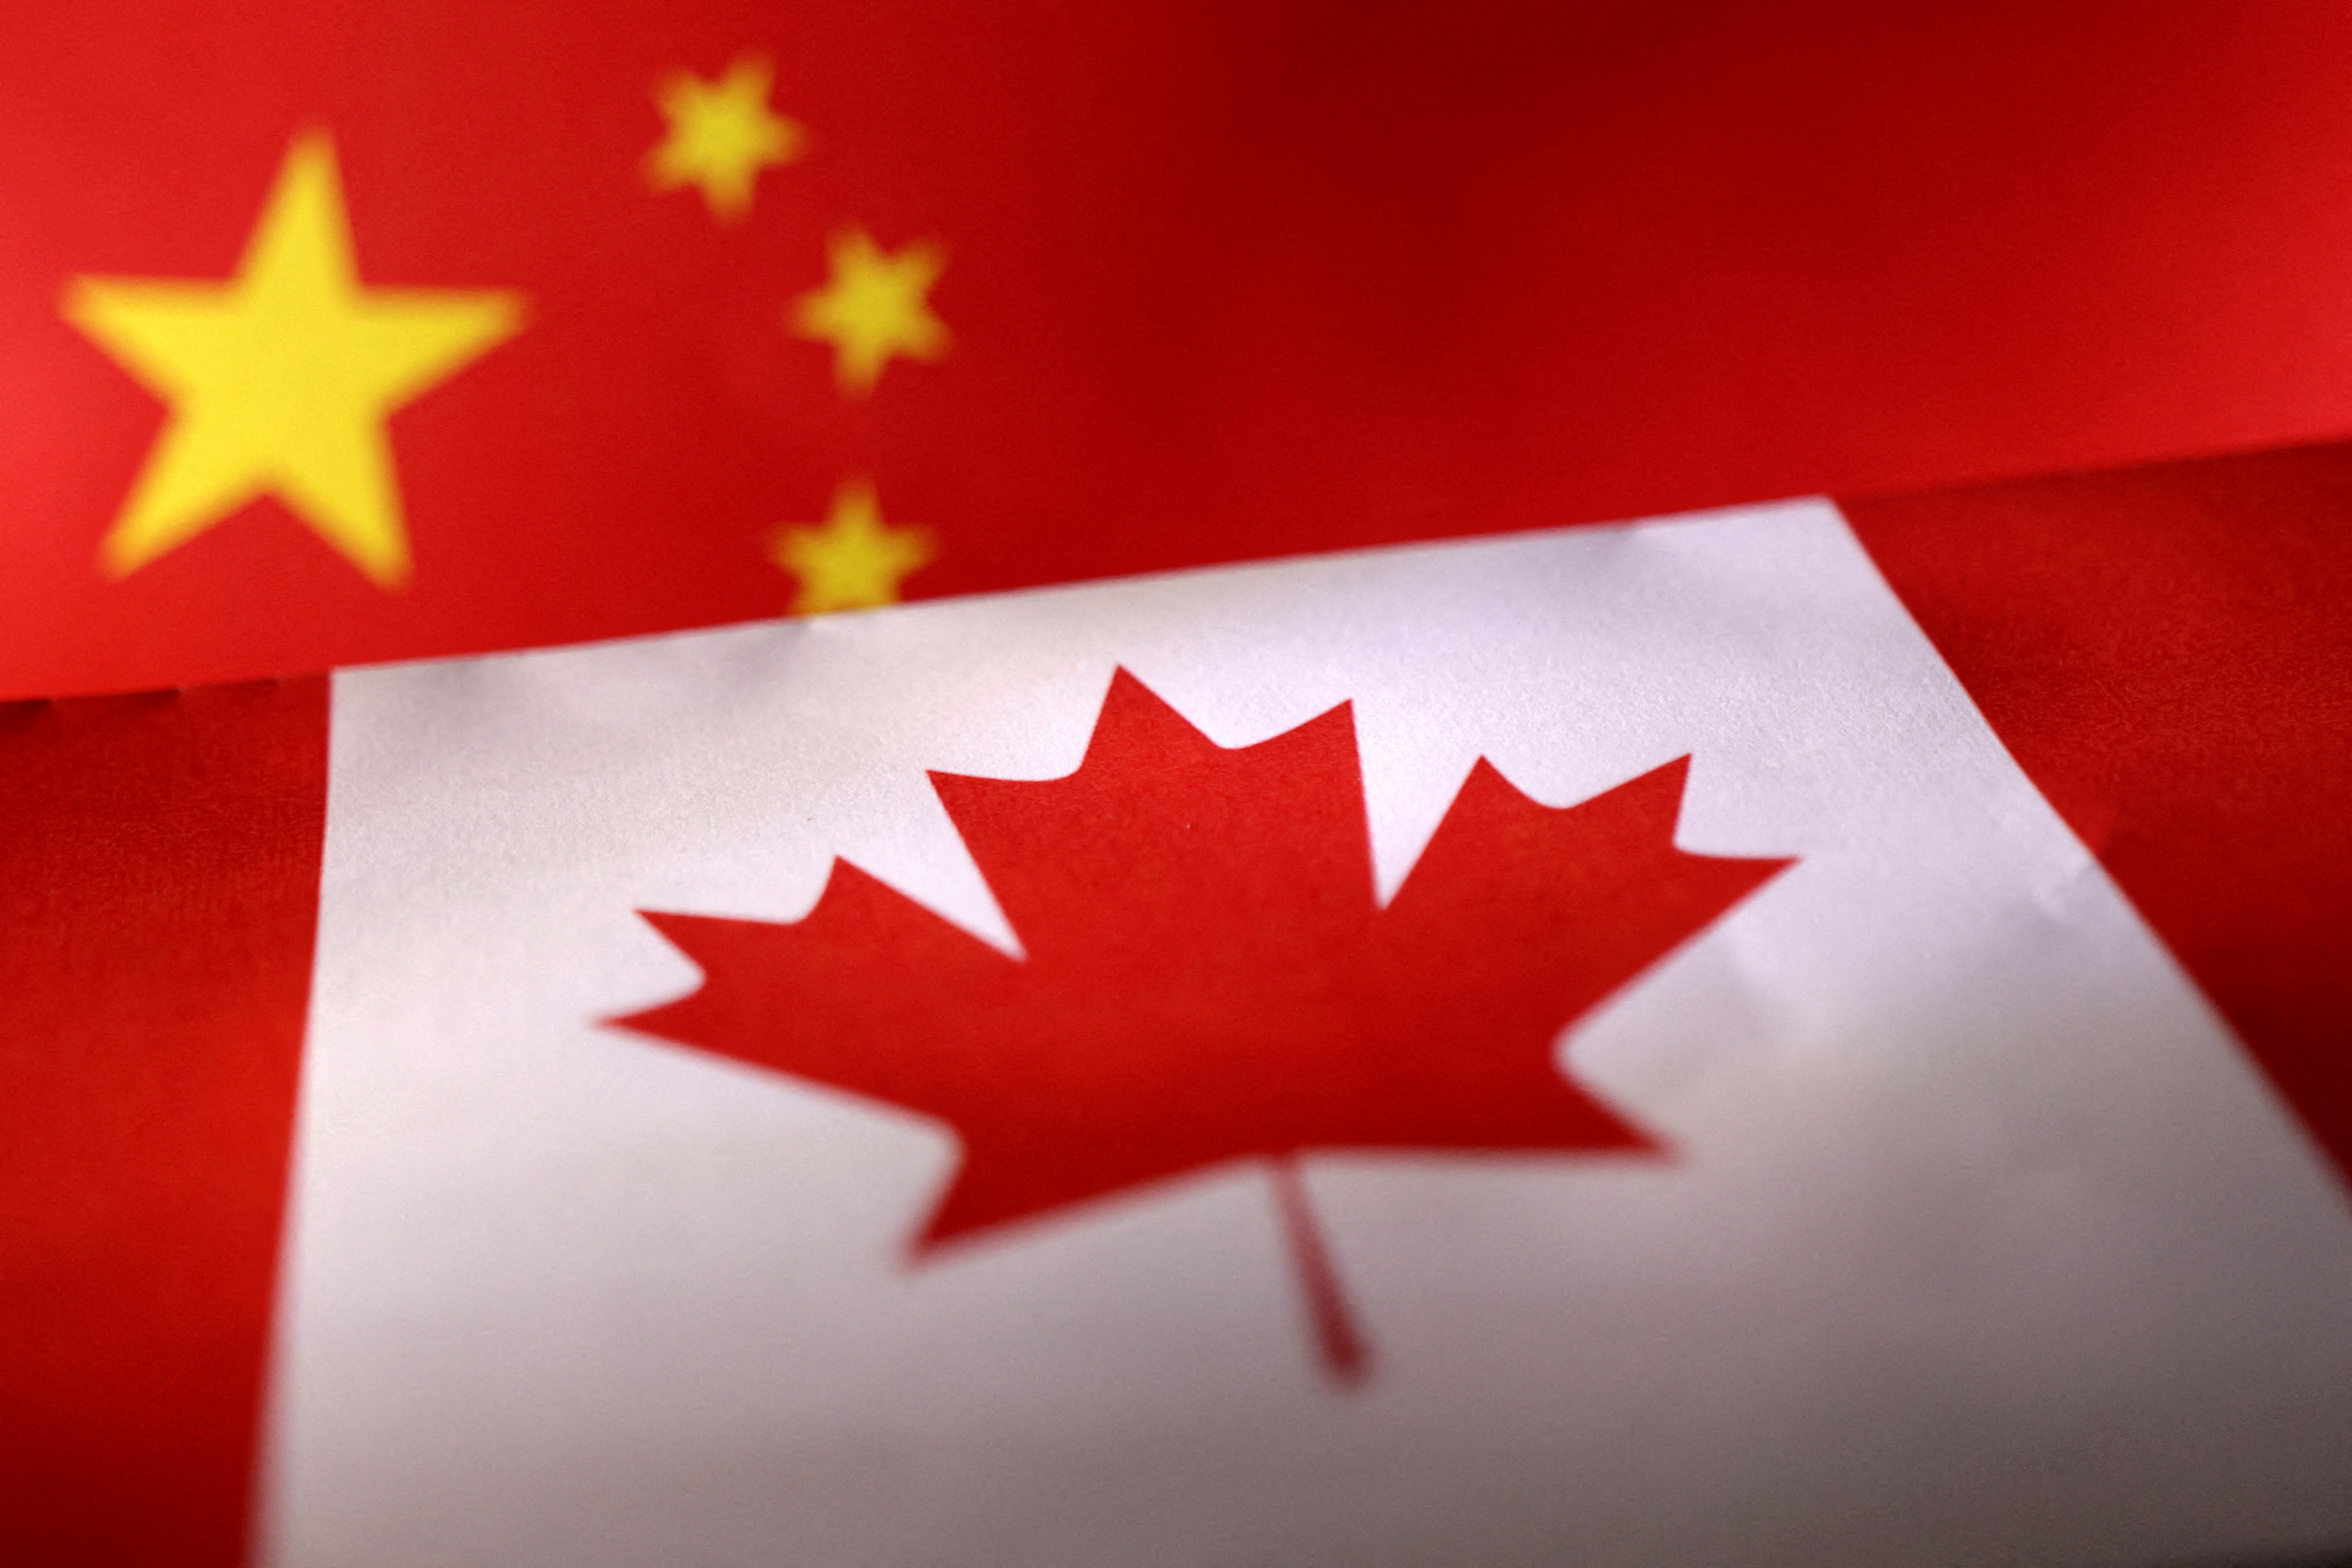 Illustration shows printed Chinese and Canada flags